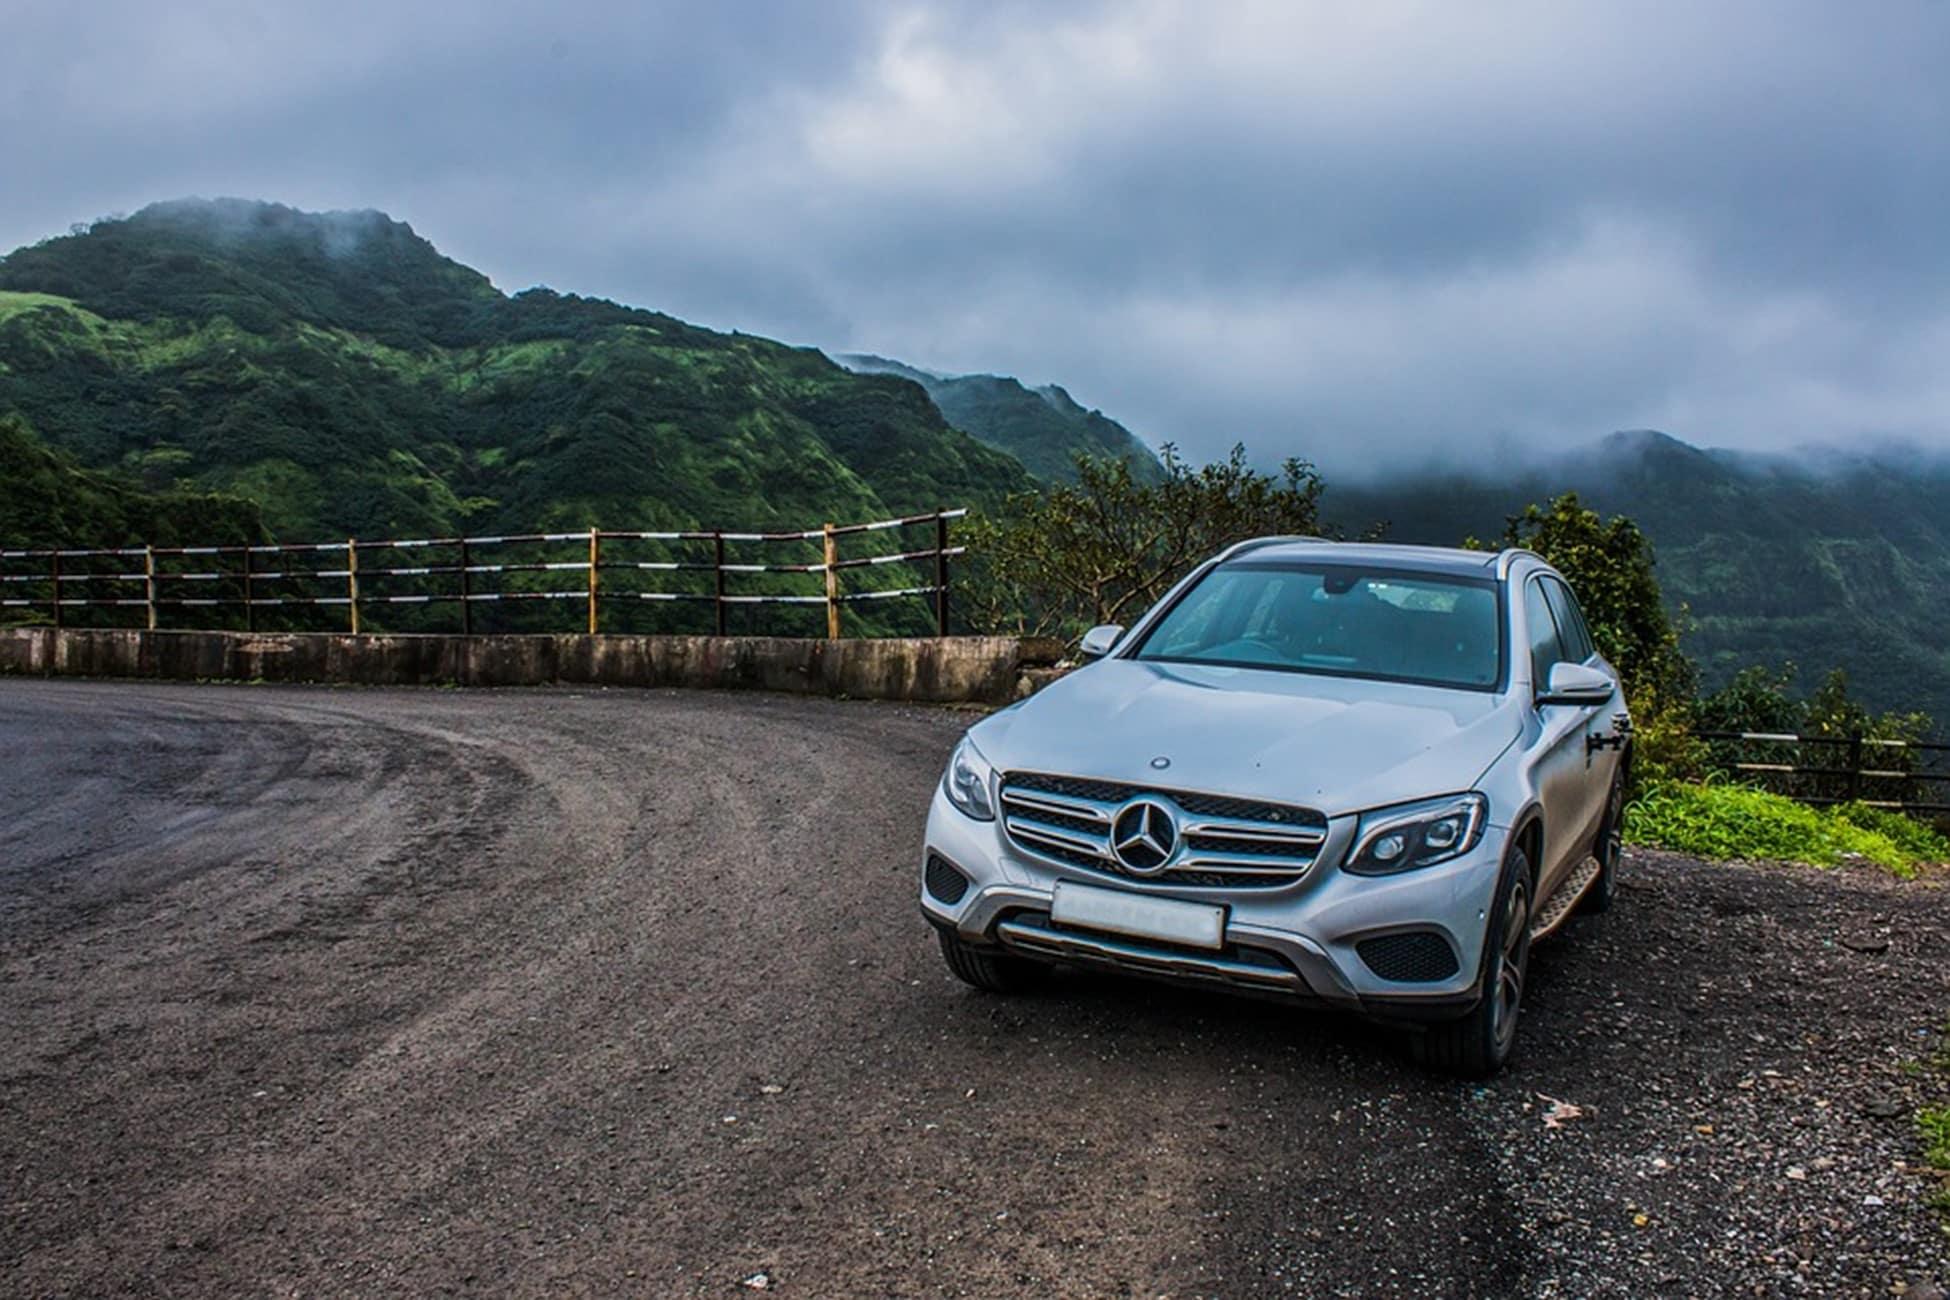 How To Choose The Right Car For Your Next Drive To The Nearest Hill Station?